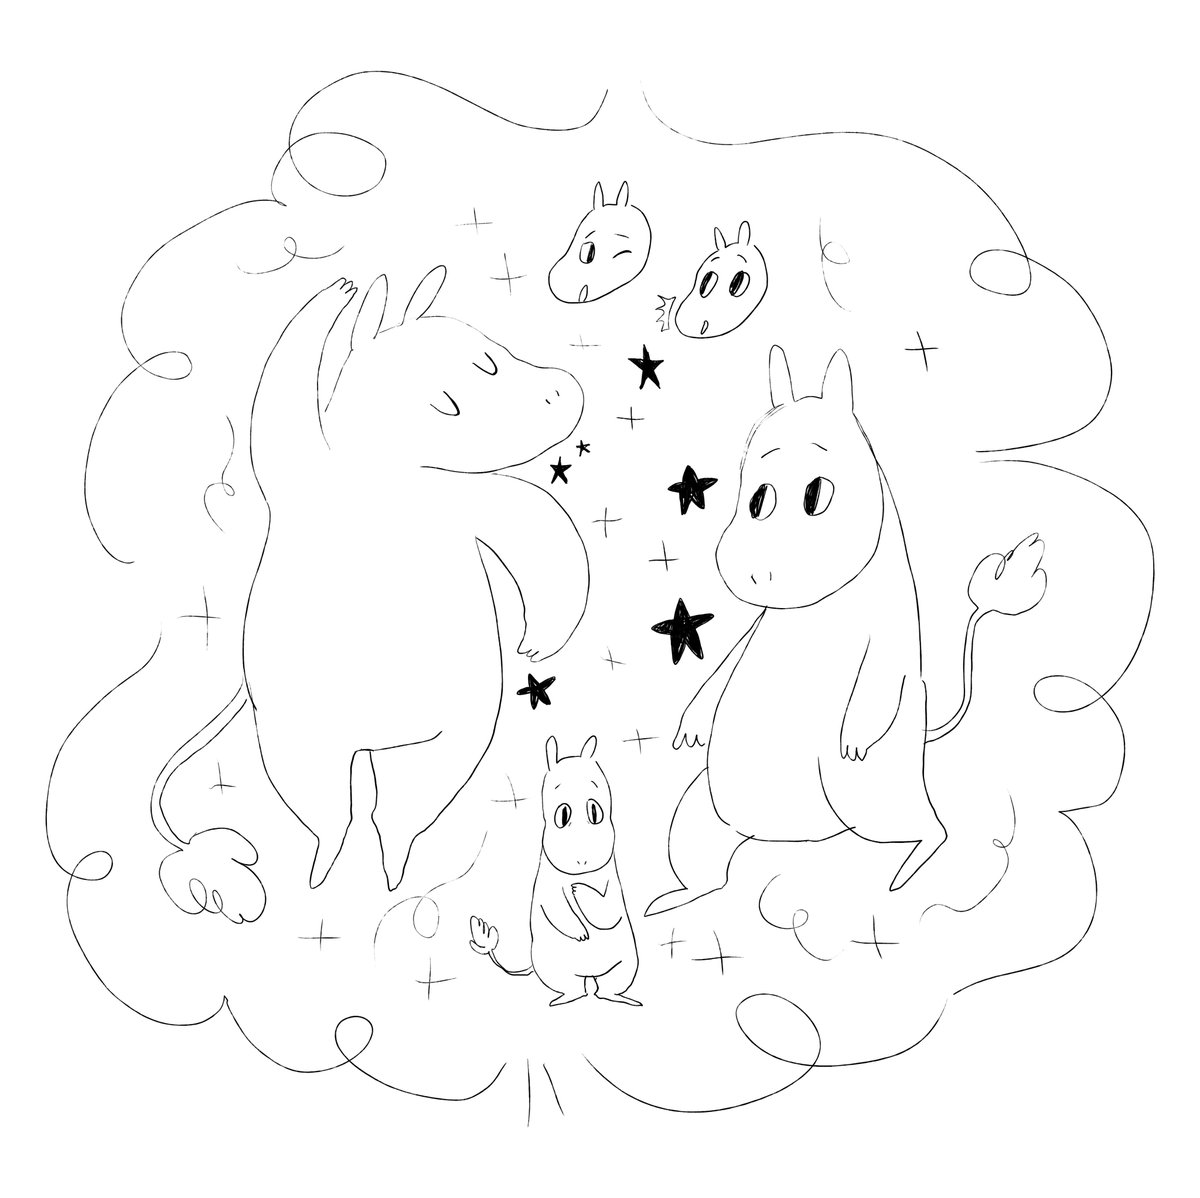 u can only talk to me about moomin now 